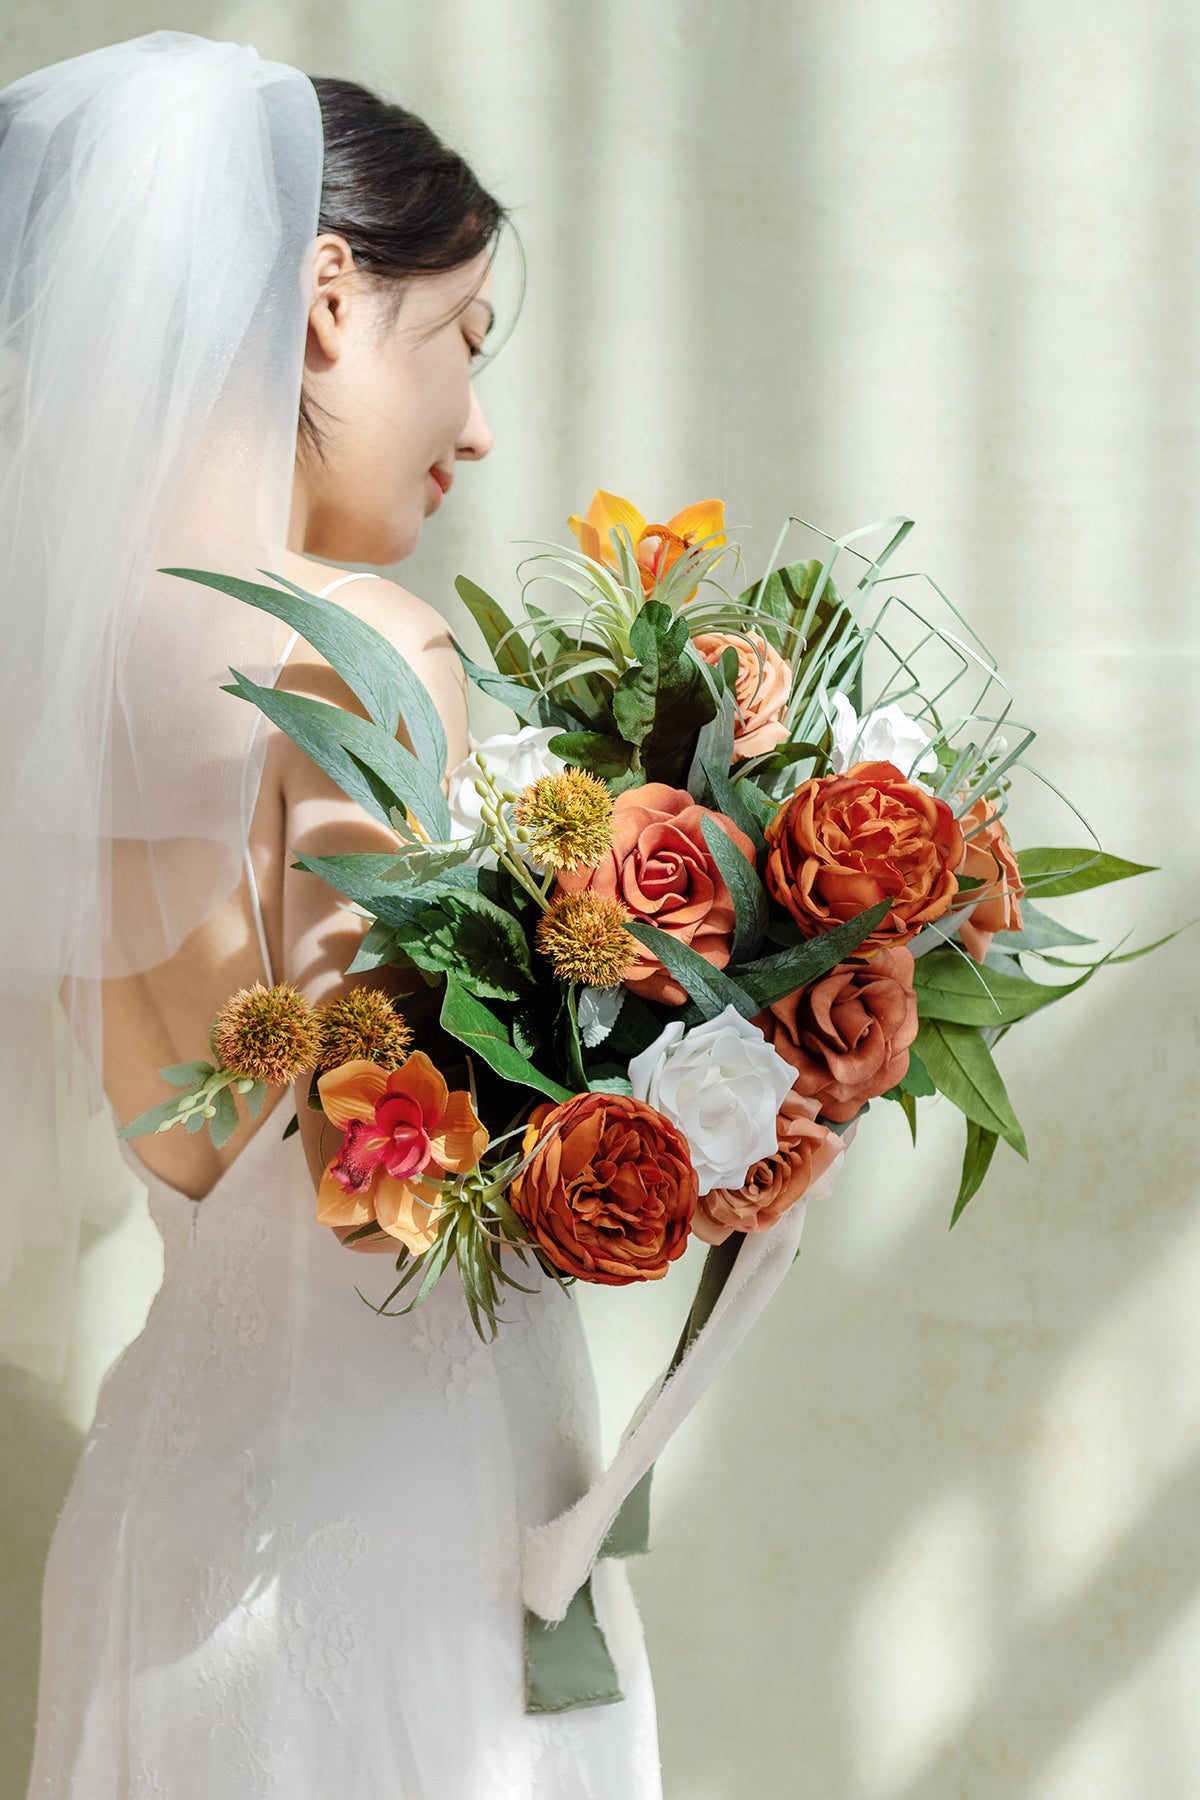 Medium Free-Form Bridal Bouquet in Orange & Olive Green | Clearance